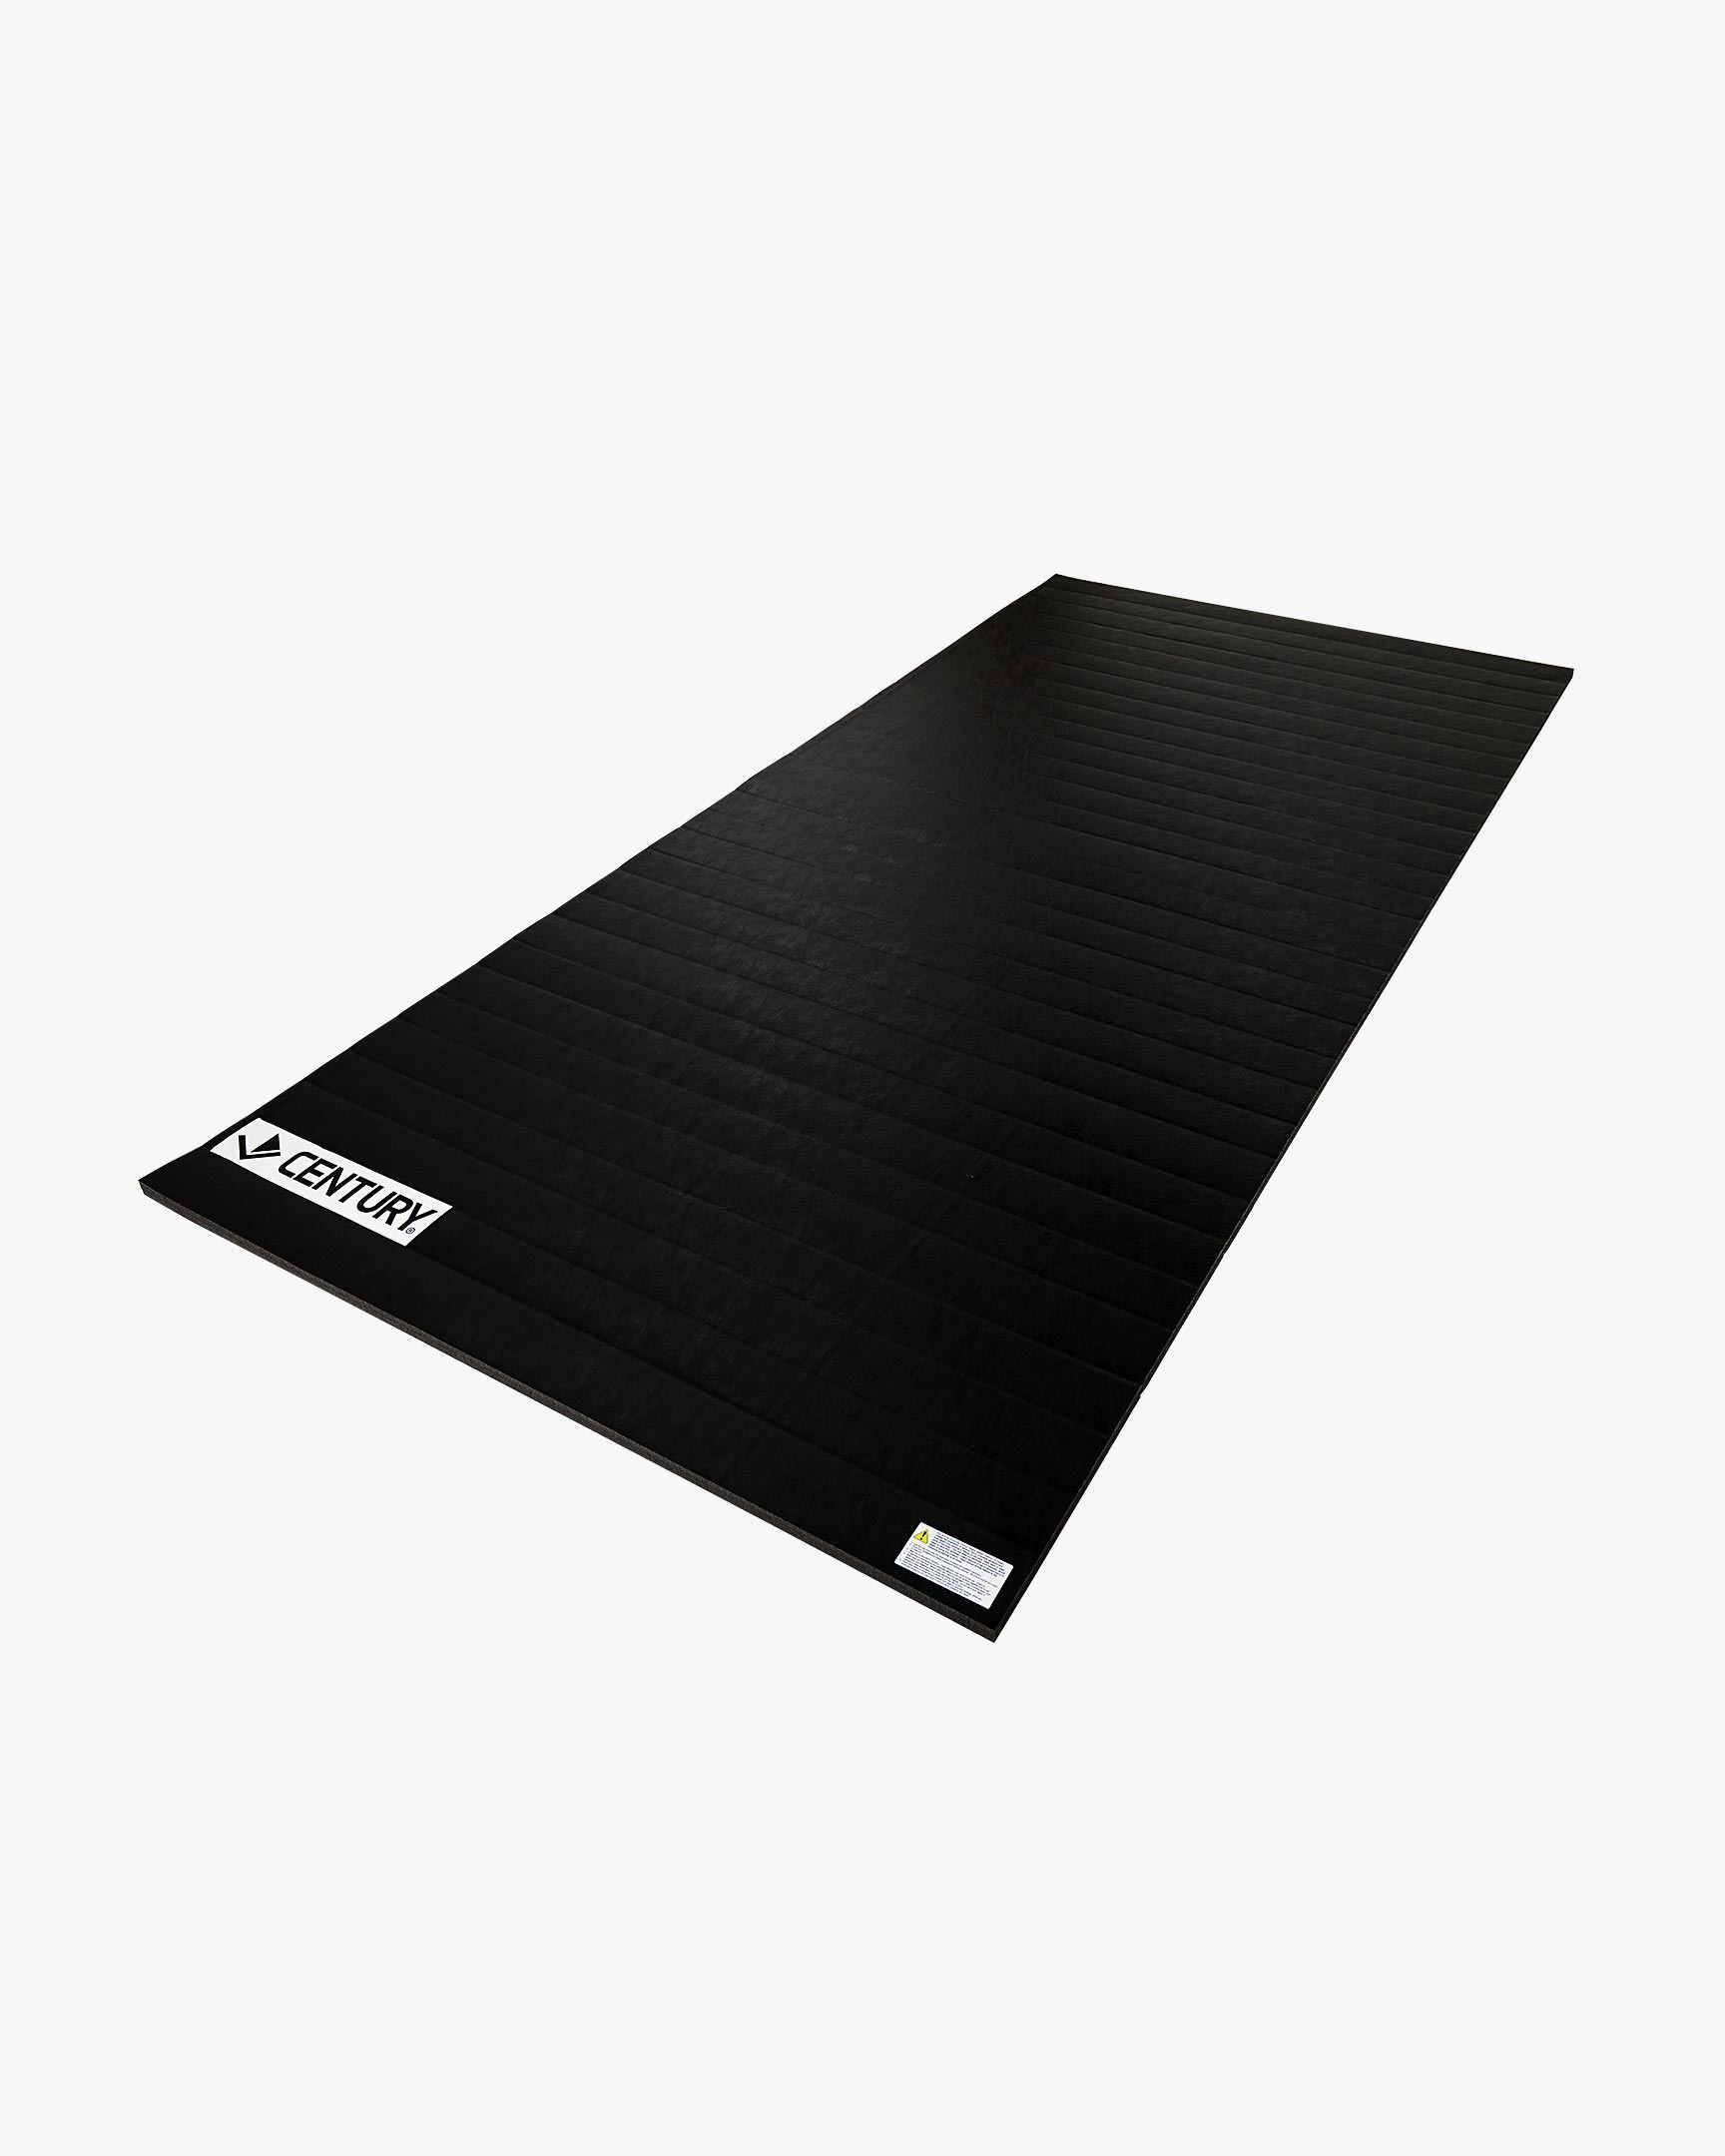 Home Tatami Rollout Mat - 5ft x 10ft x 1.25in Thick